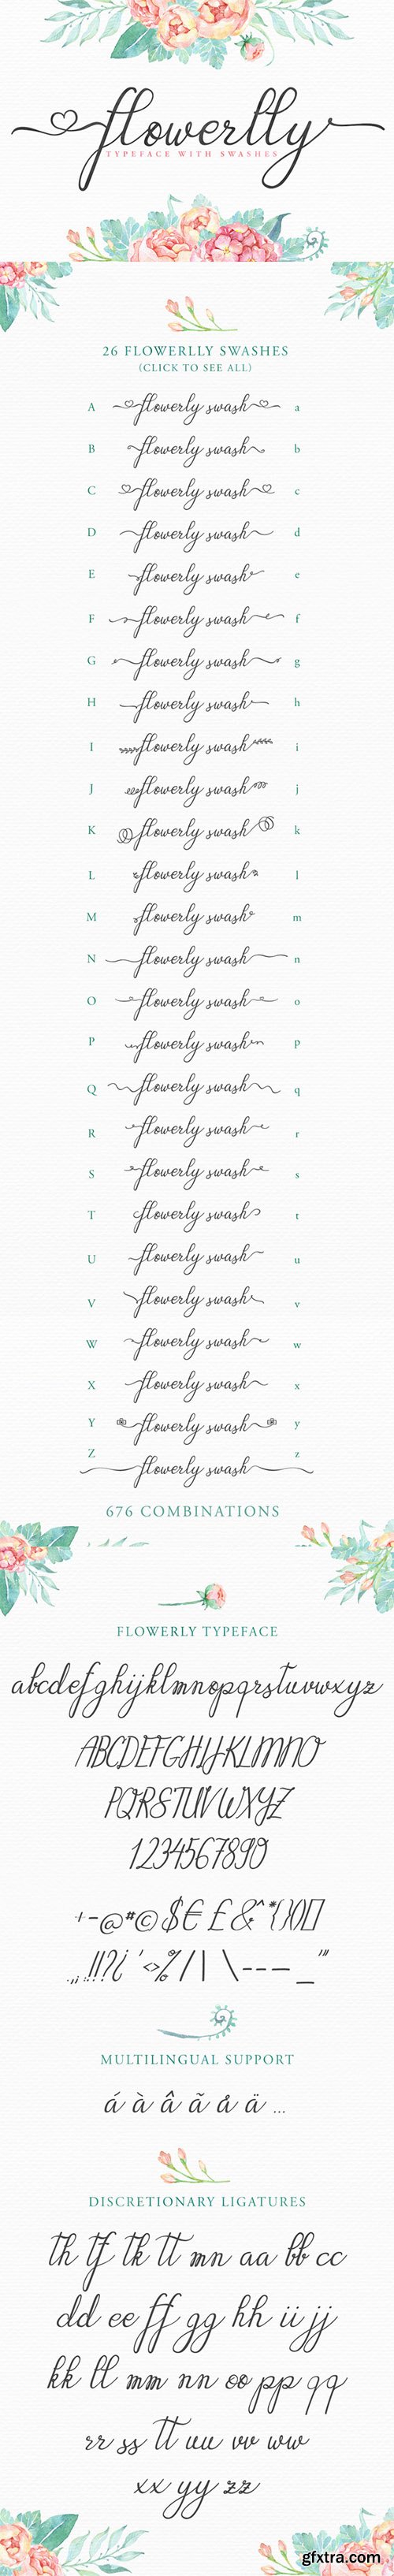 CM Flowerlly Typeface with Swashes 364817